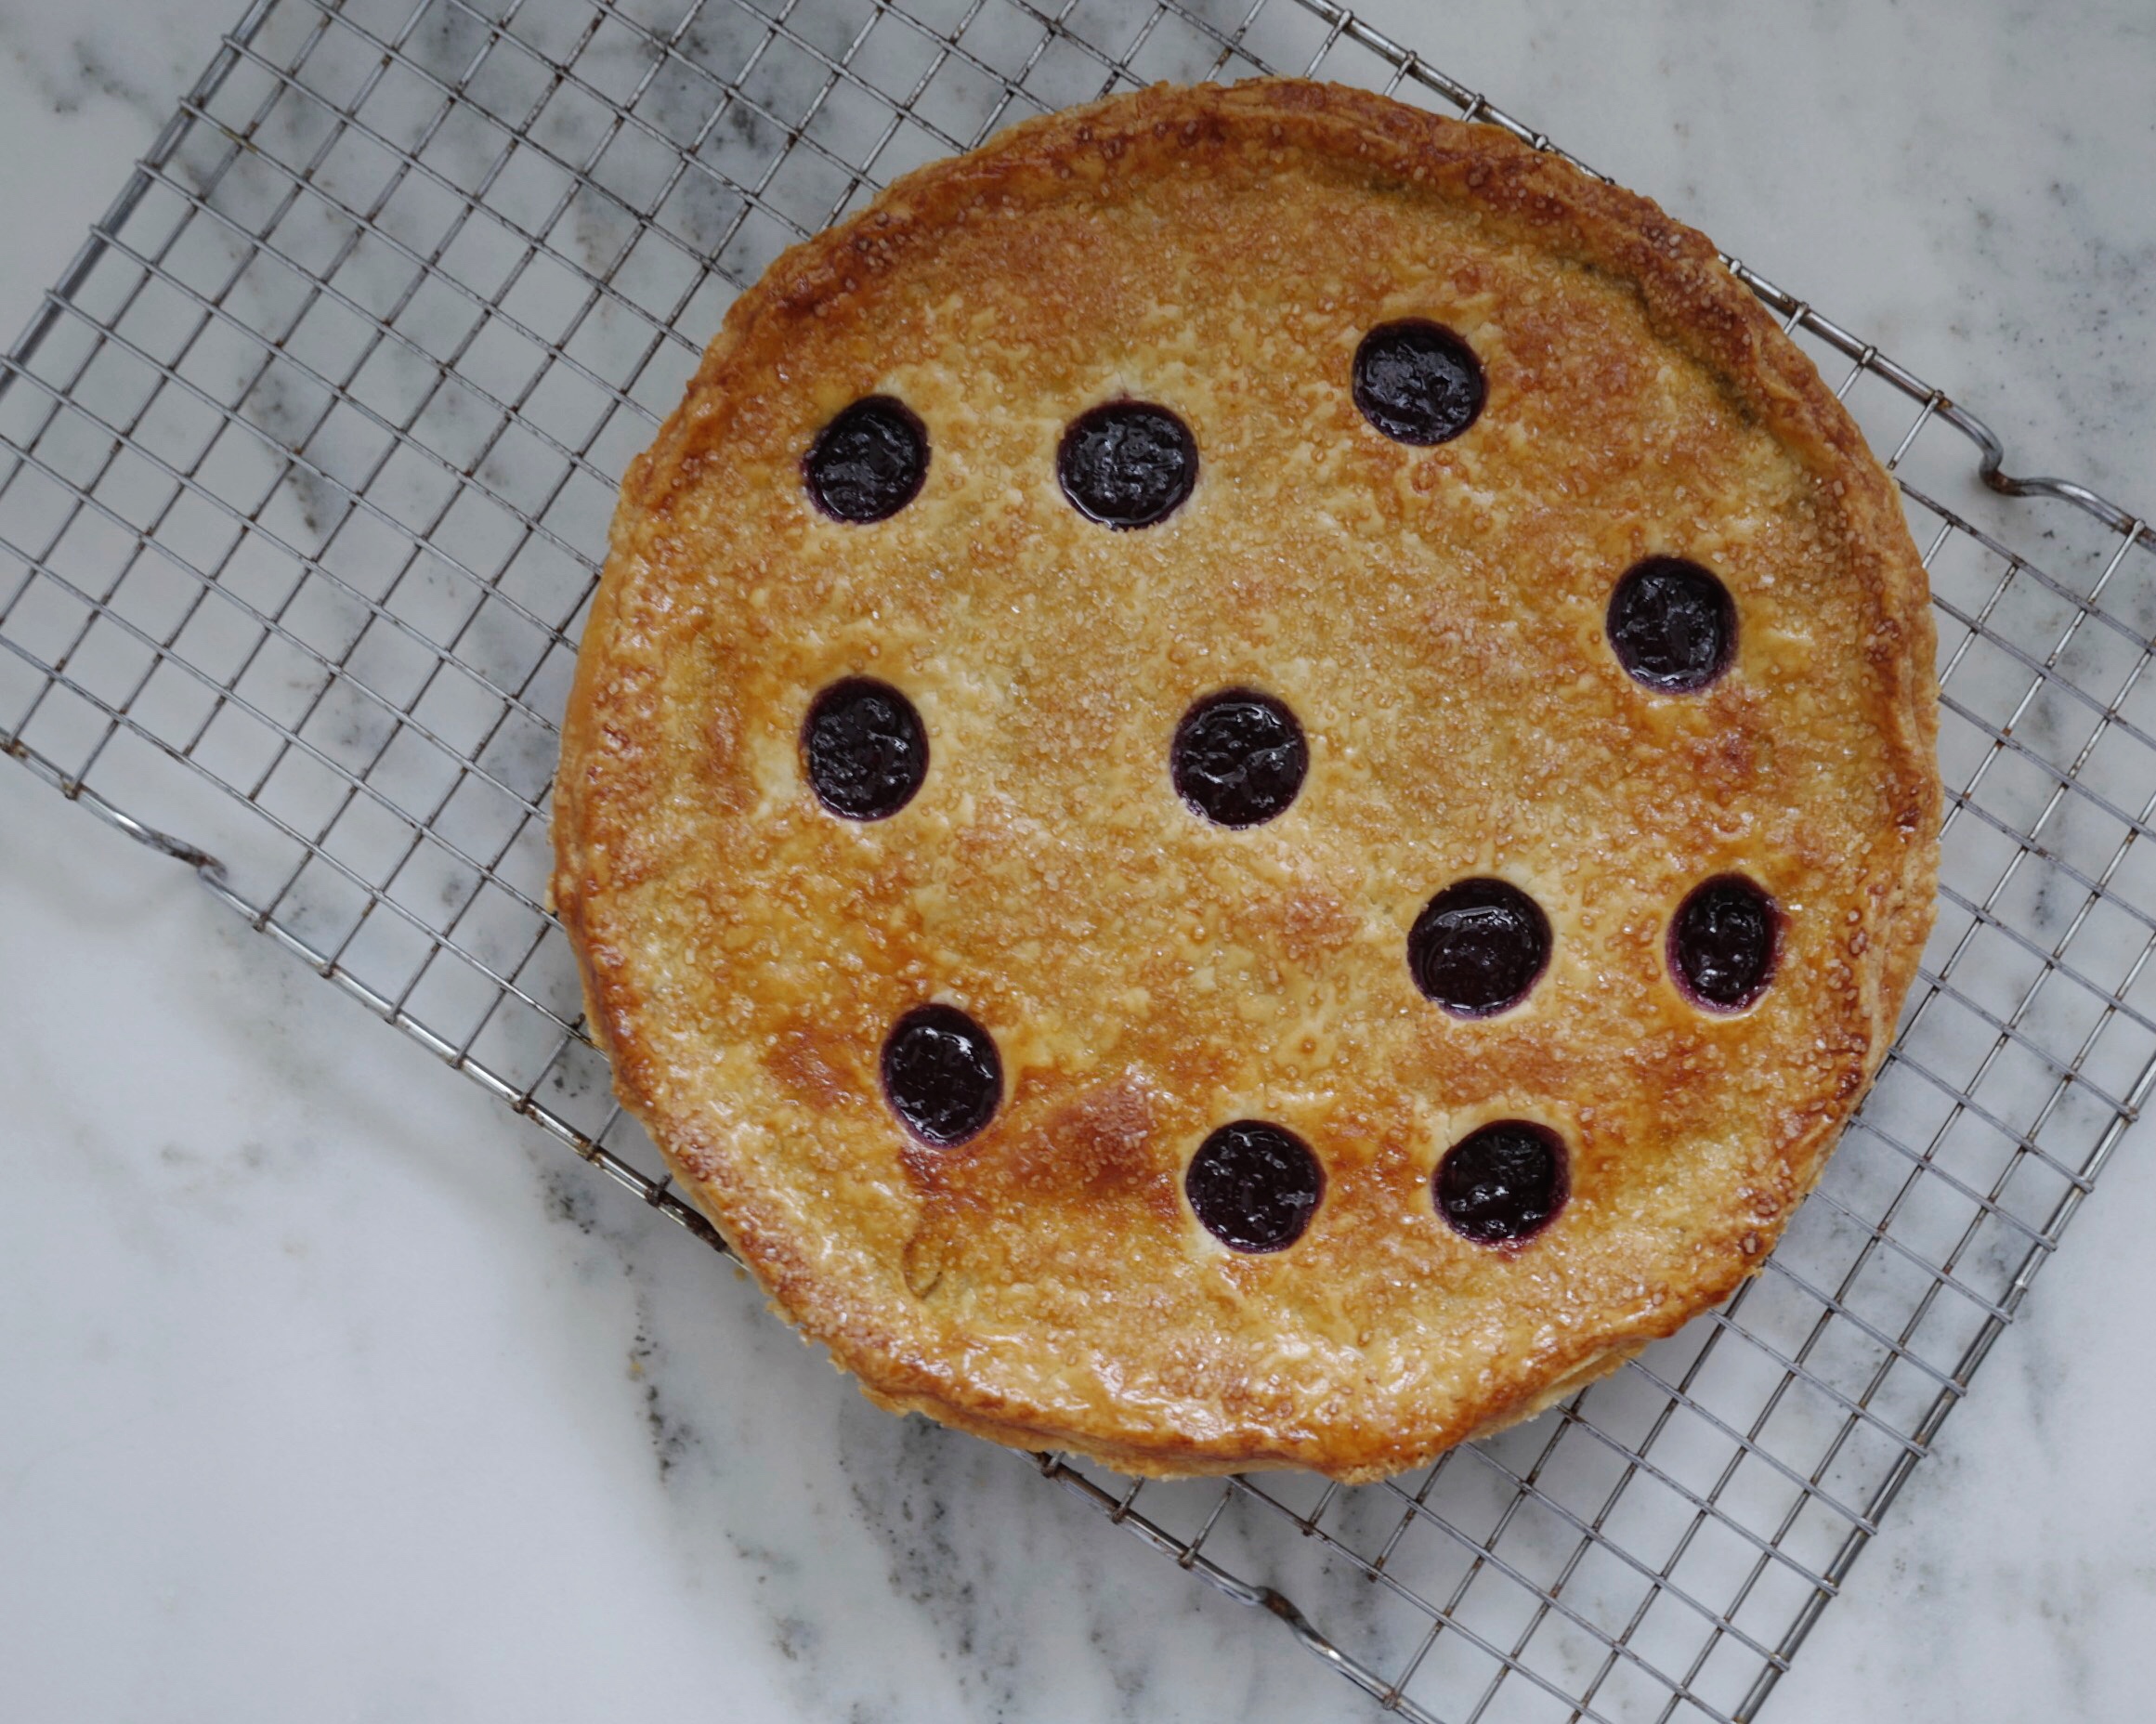 Possibly not concord grape jam tart puts Pop-Tarts® to shame